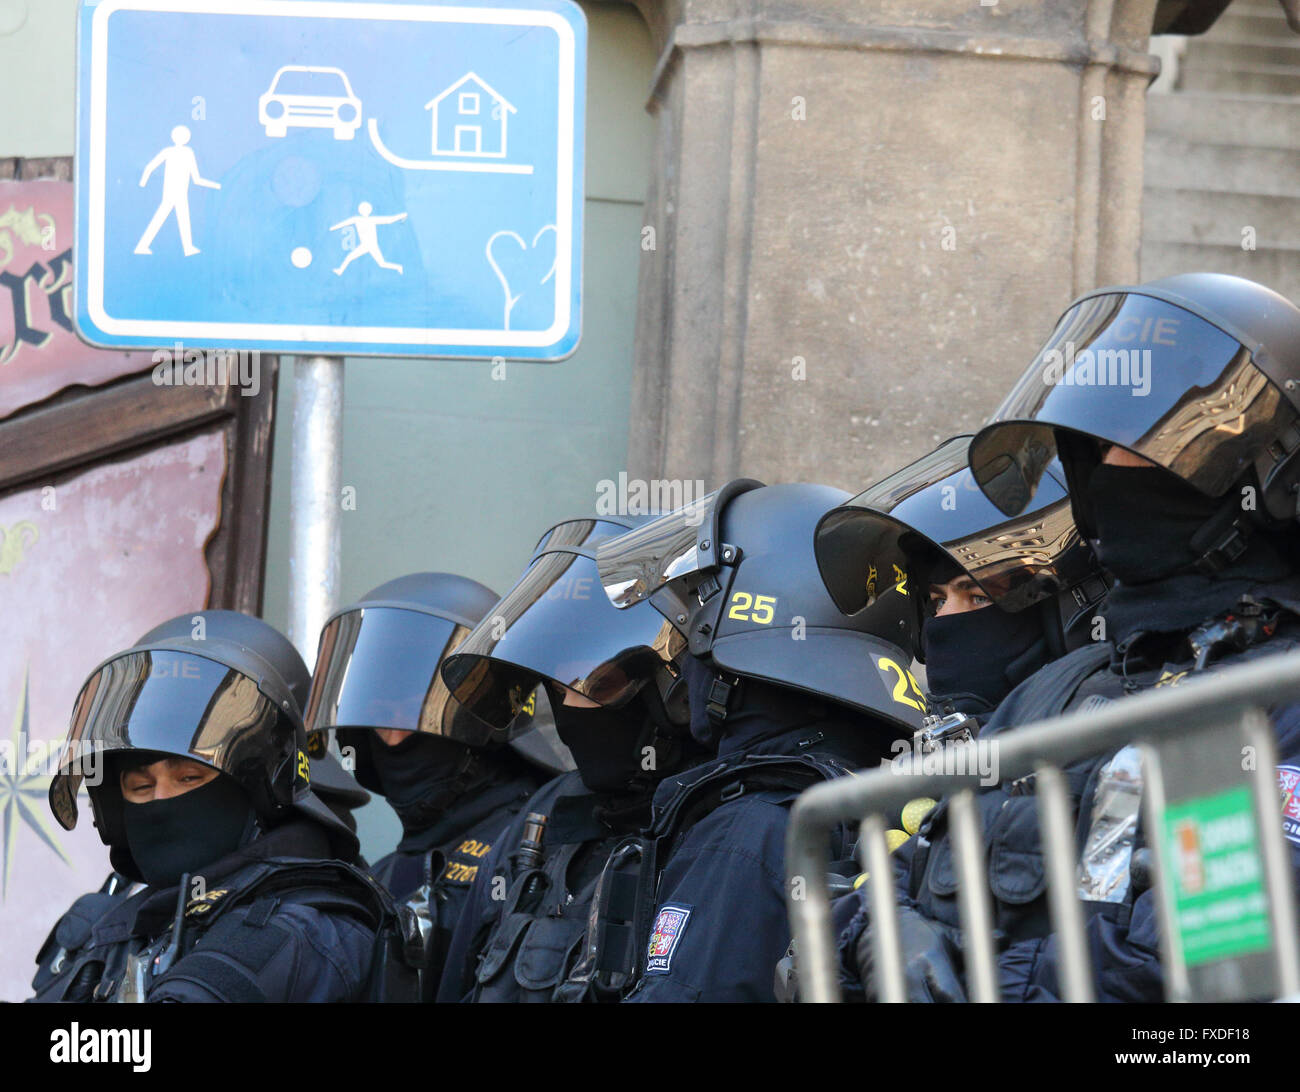 Riot police in Prague, Czech Republic, monitoring protest rally in support of Tibet that coincided with a visit by President Xi Stock Photo